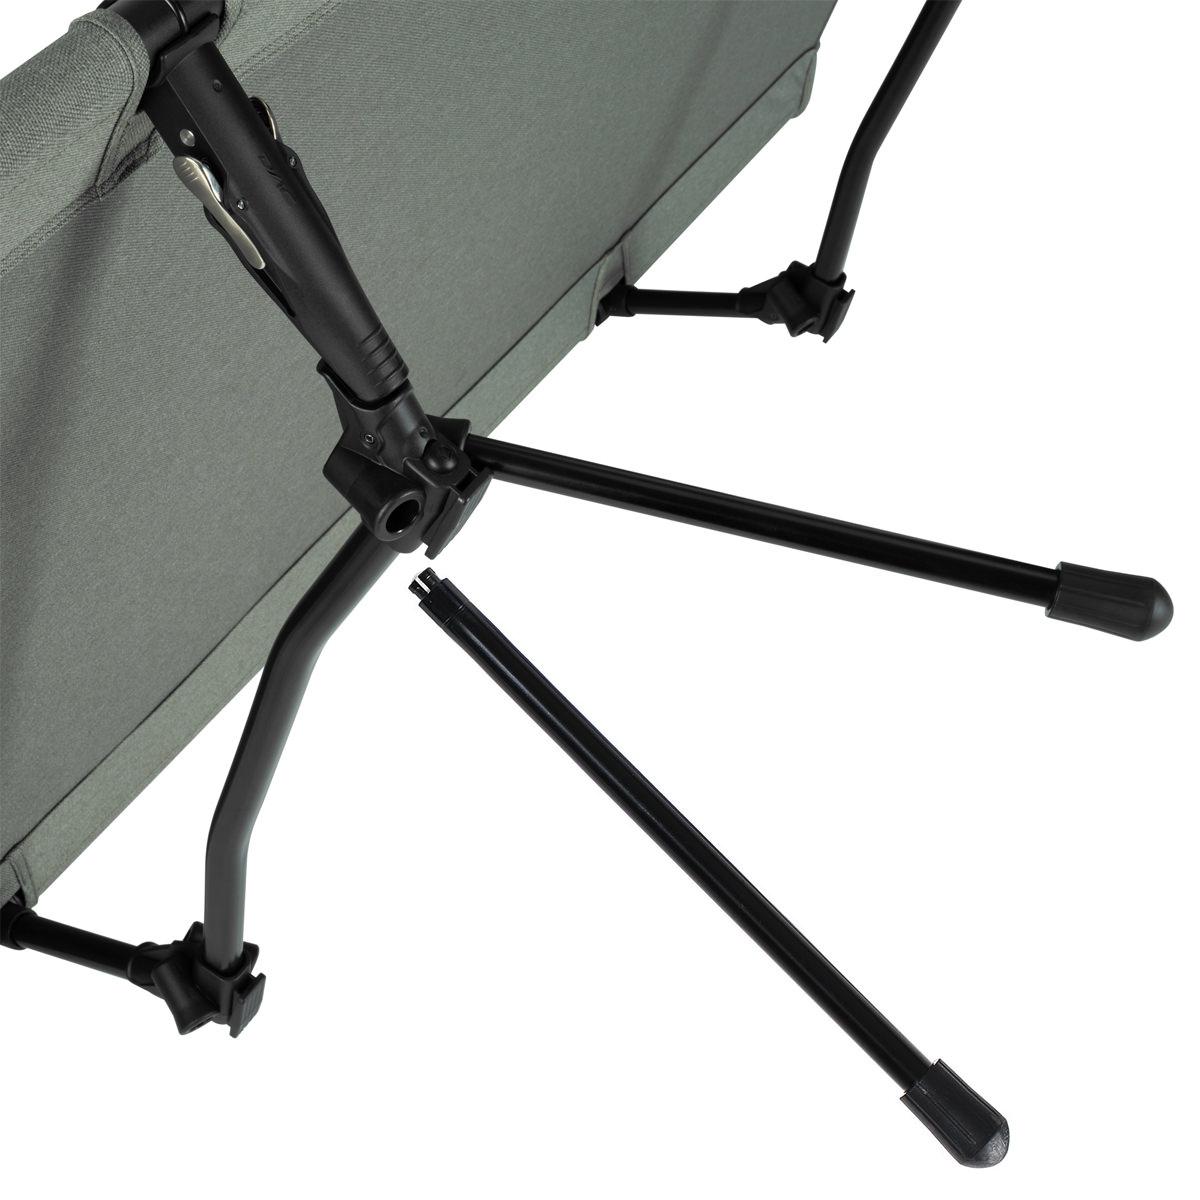 Helinox Cot One Home Convertible